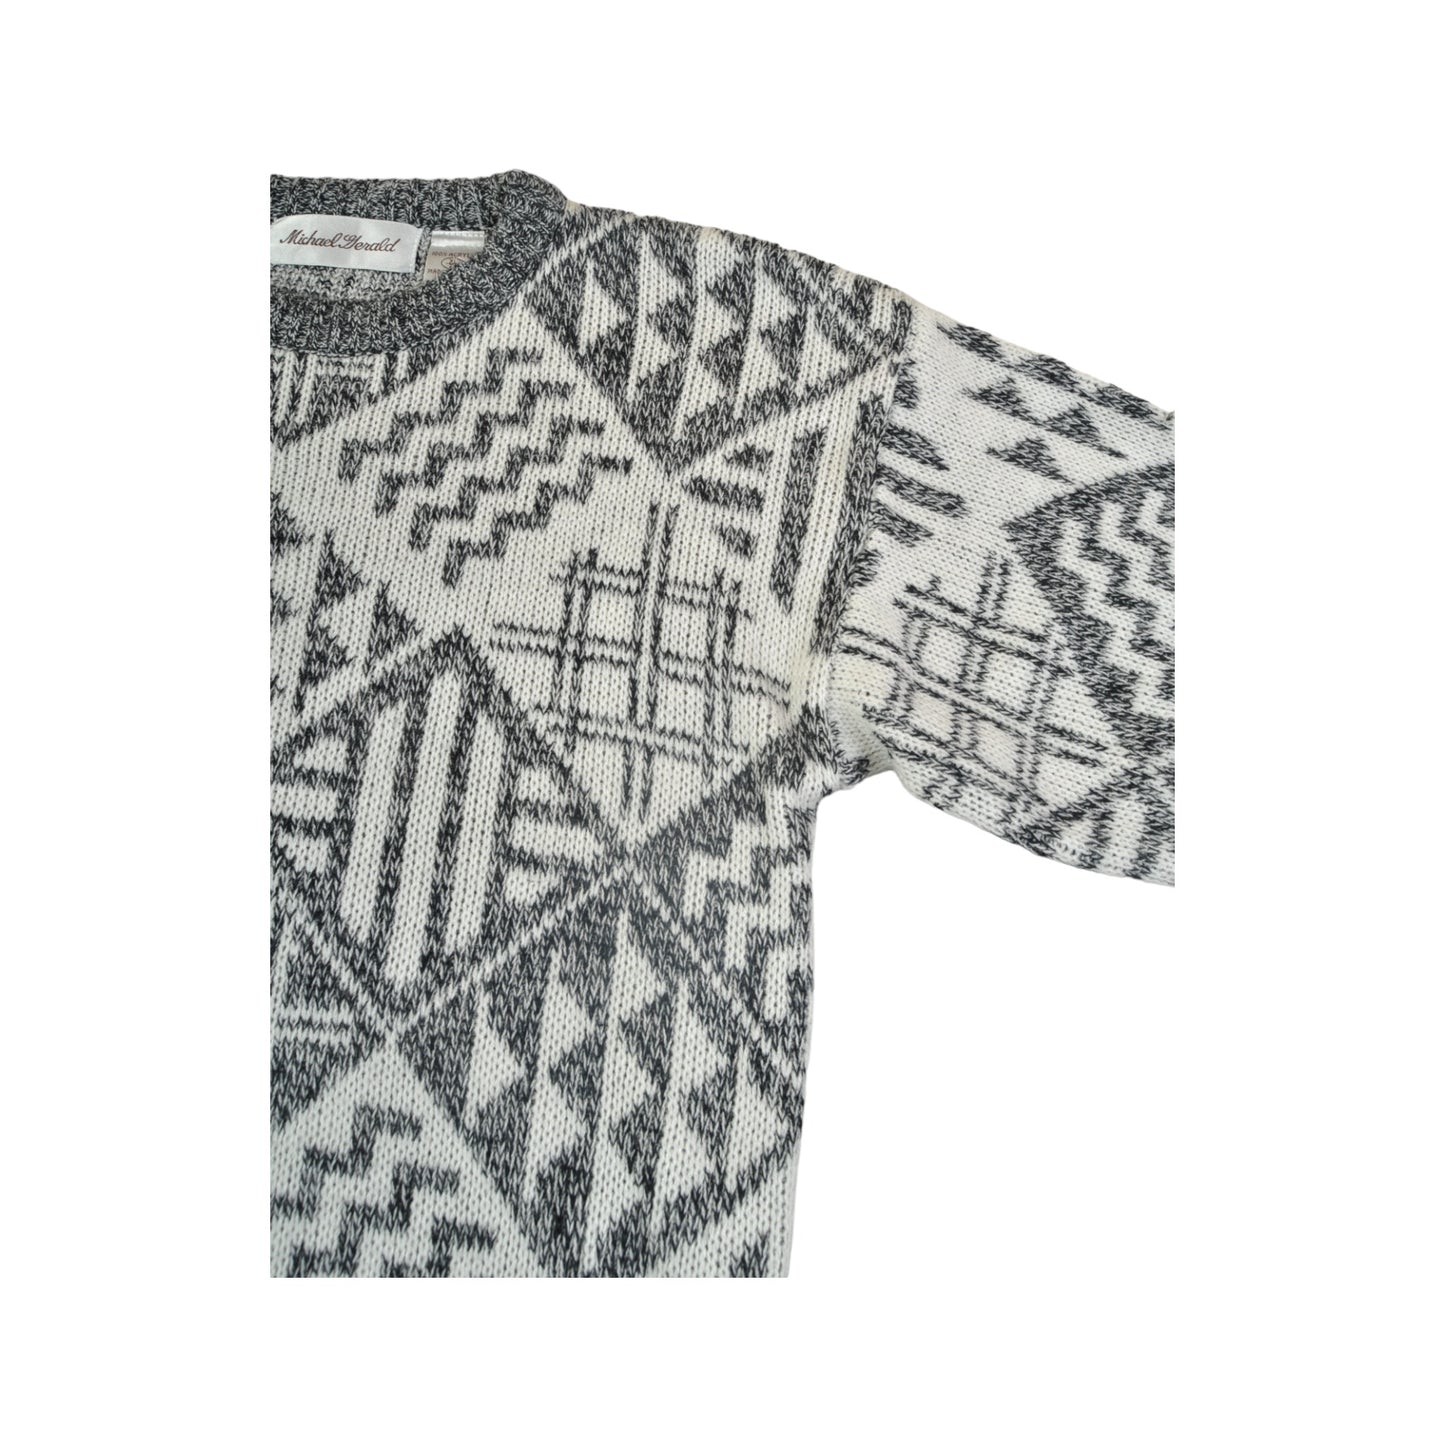 Vintage Knitted Jumper Retro Pattern Grey/White Ladies Small